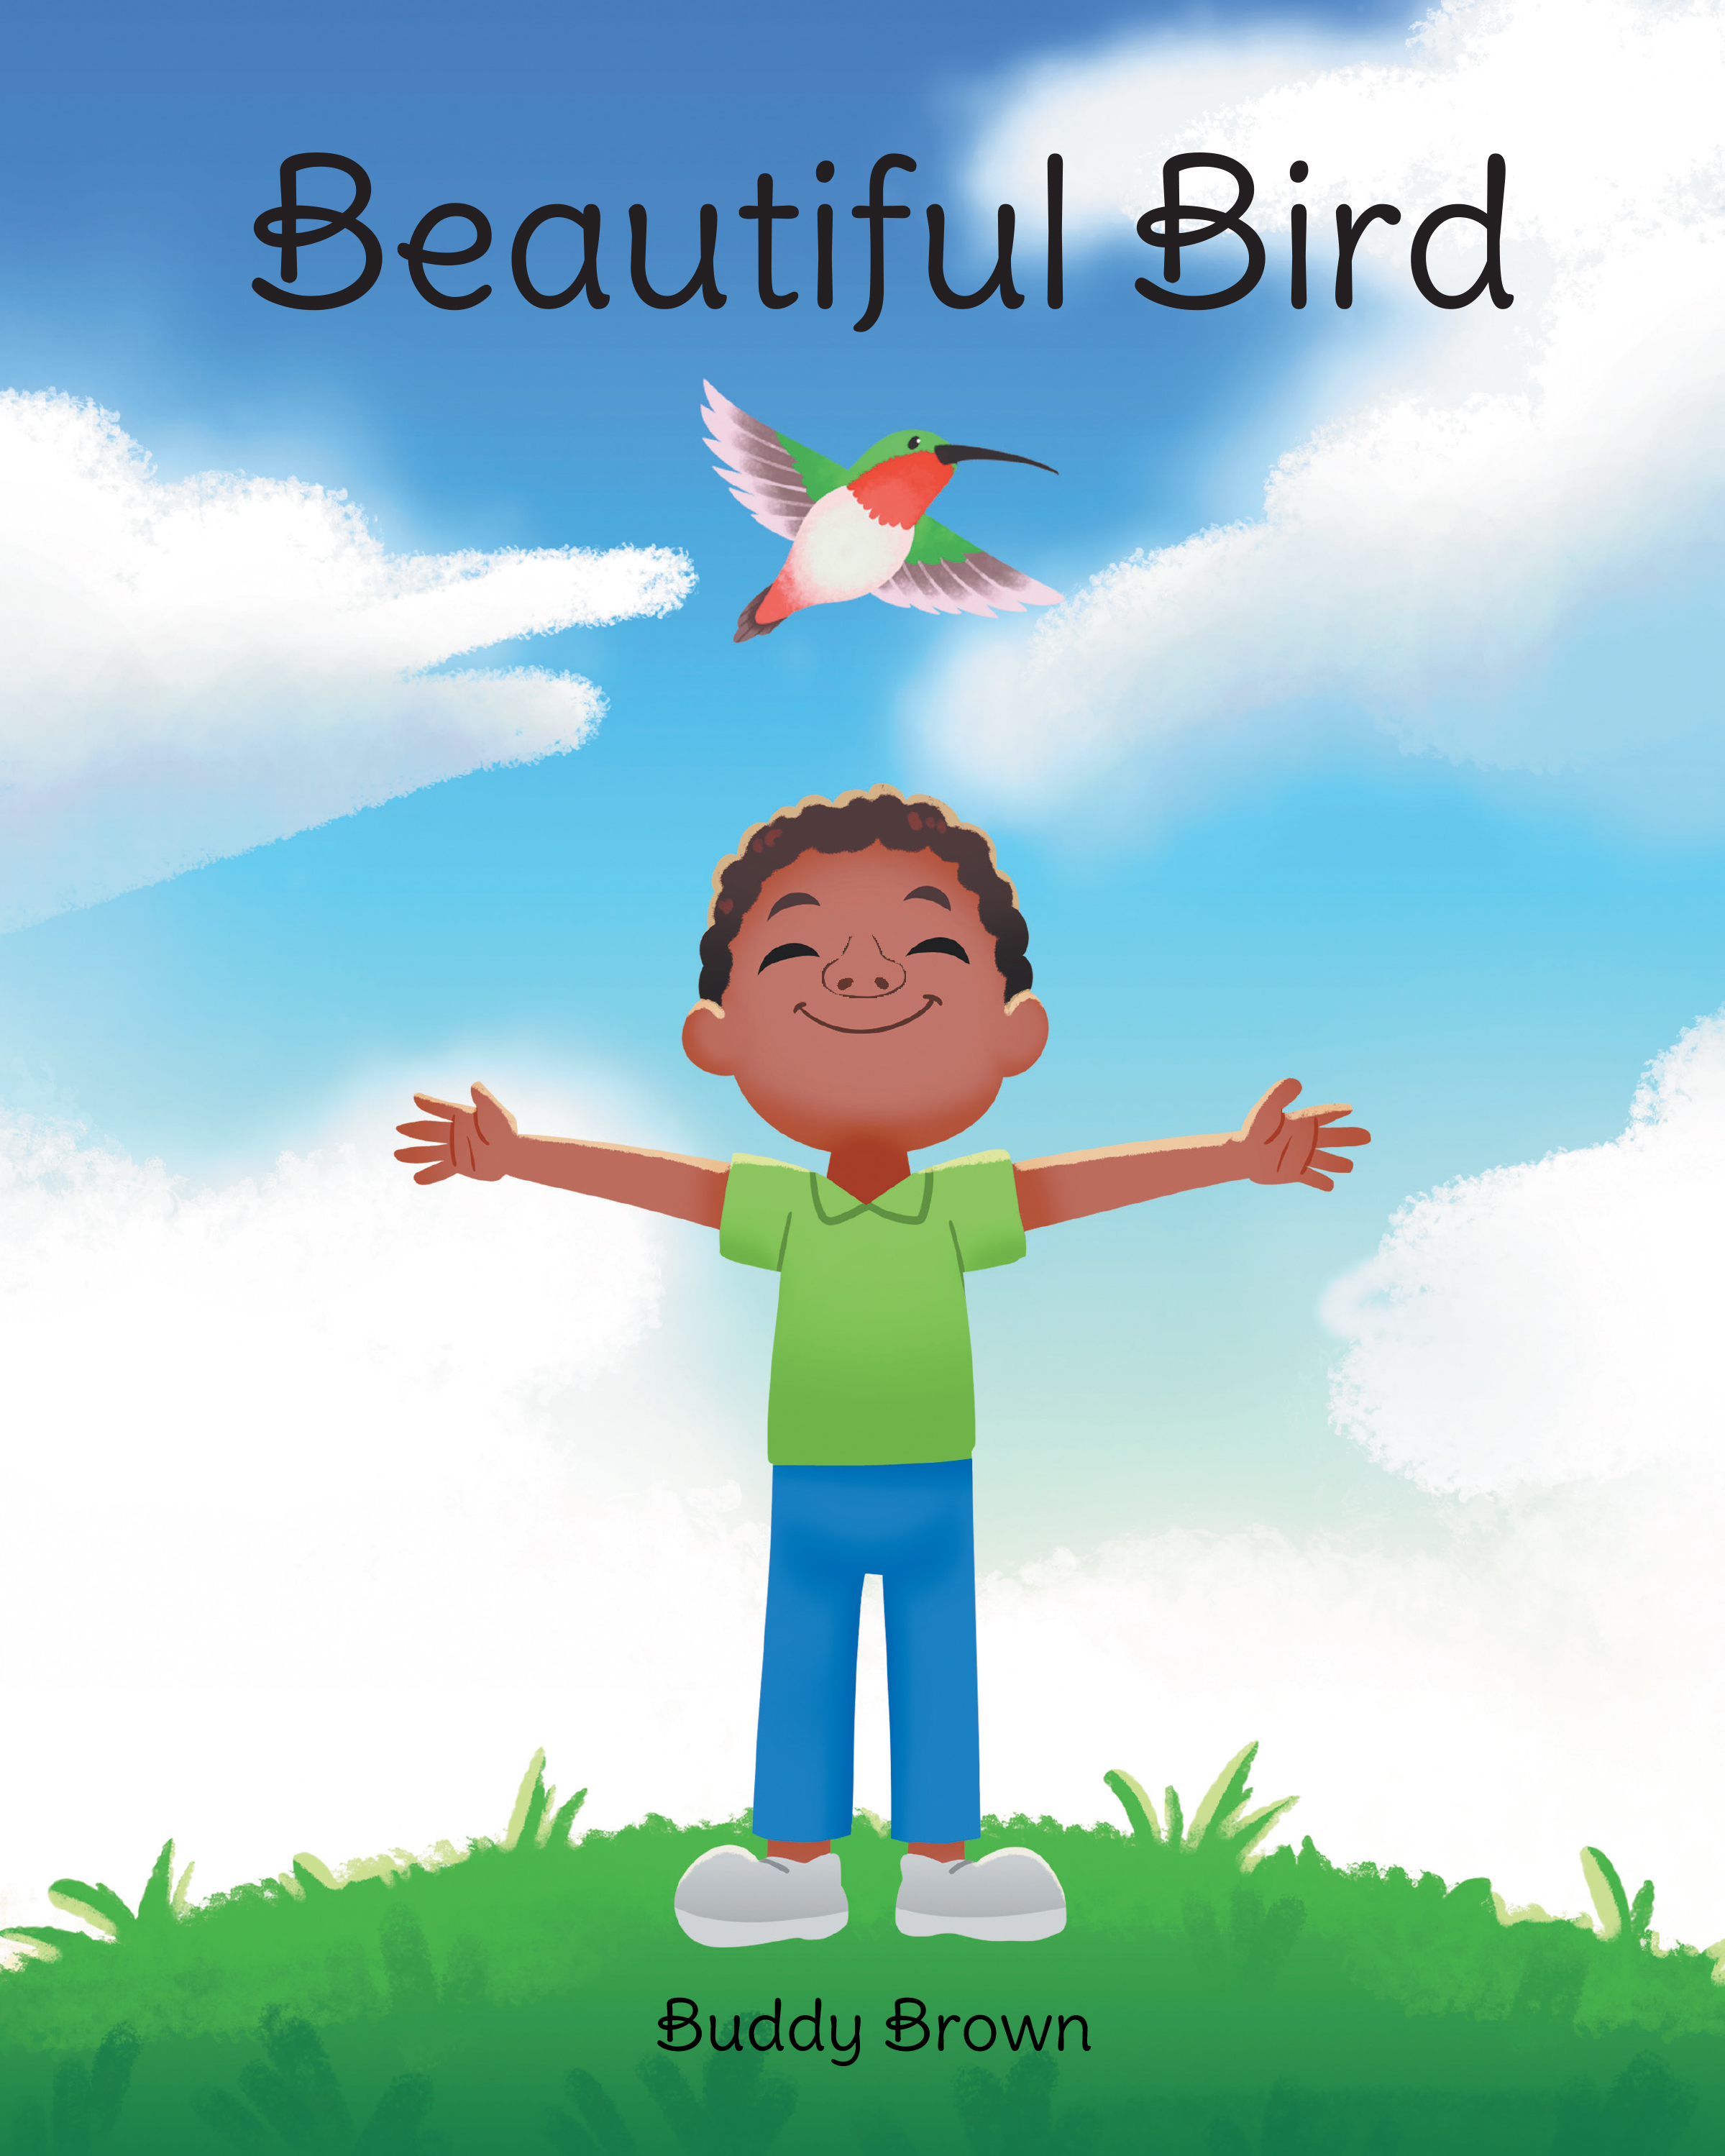 Buddy Brown’s New Book, "Beautiful Bird," is a Heartfelt Tale That Follows a Young Boy Who is Visited by a Messenger of Faith, Courage, and Spiritual Insight